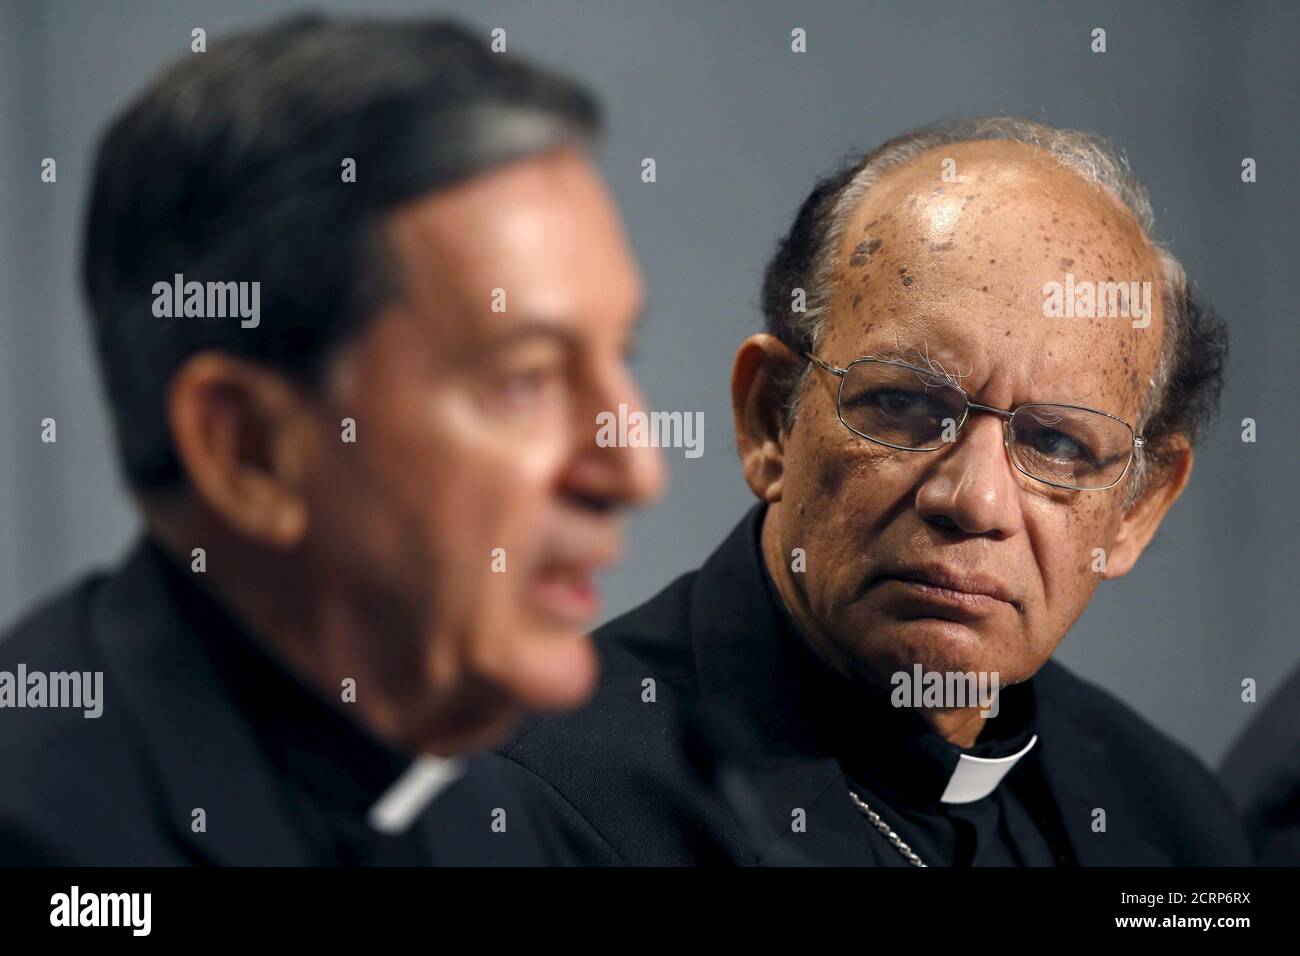 Cardinal Oswald Gracias (R) looks on as Cardinal Ruben Salazar Gomez speaks during a news conference at the Vatican, October 26, 2015. Roman Catholic leaders from around the world on Monday made a joint appeal to a forthcoming United Nations conference on climate change to produce a 'fair, legally binding and truly transformational' agreement.REUTERS/Alessandro Bianchi Stock Photo